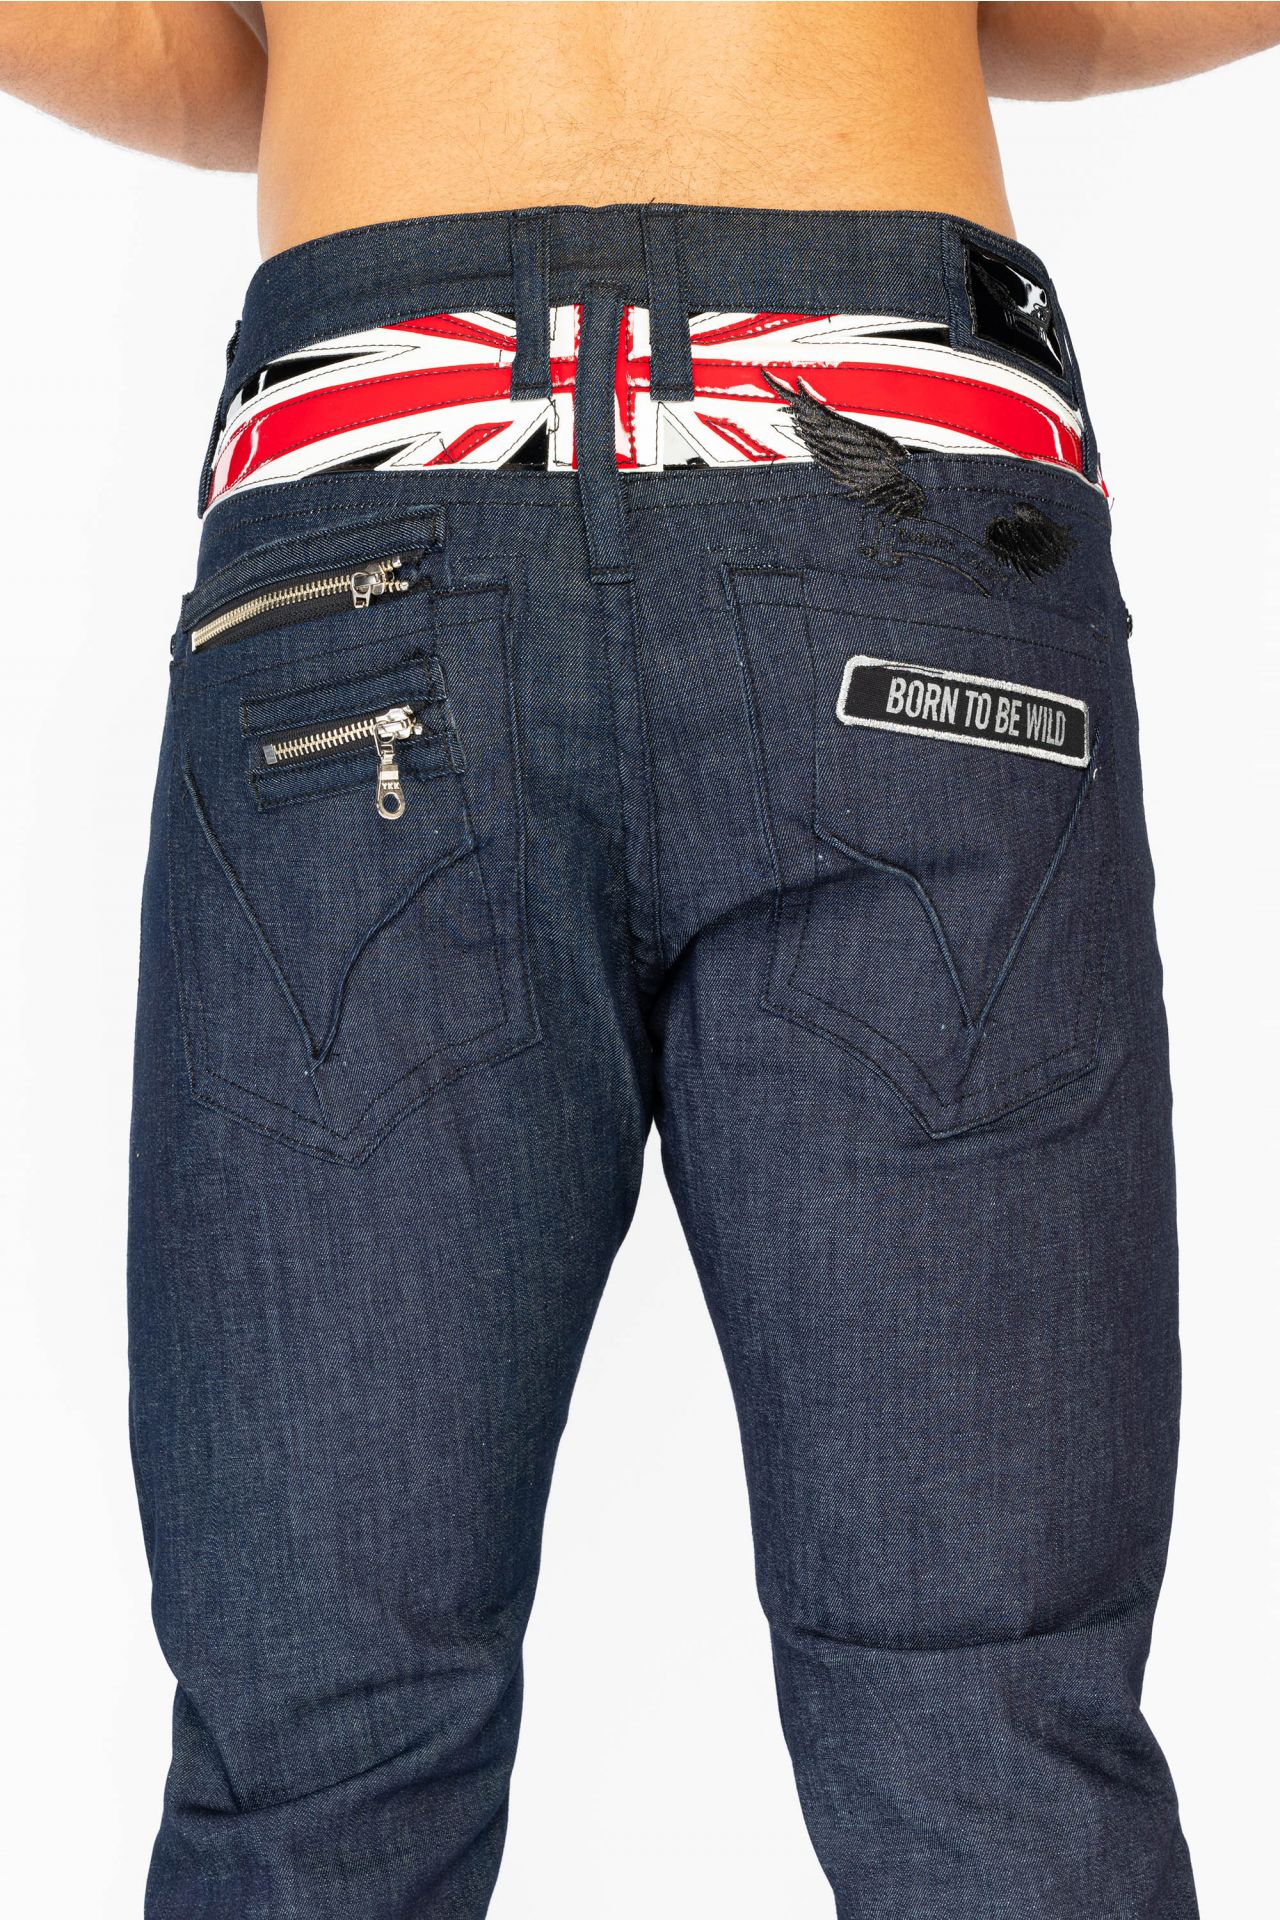 RAW BLACK DENIM MENS SLIM JEANS WITH BRITISH FLAG AND WING EMBROIDERY